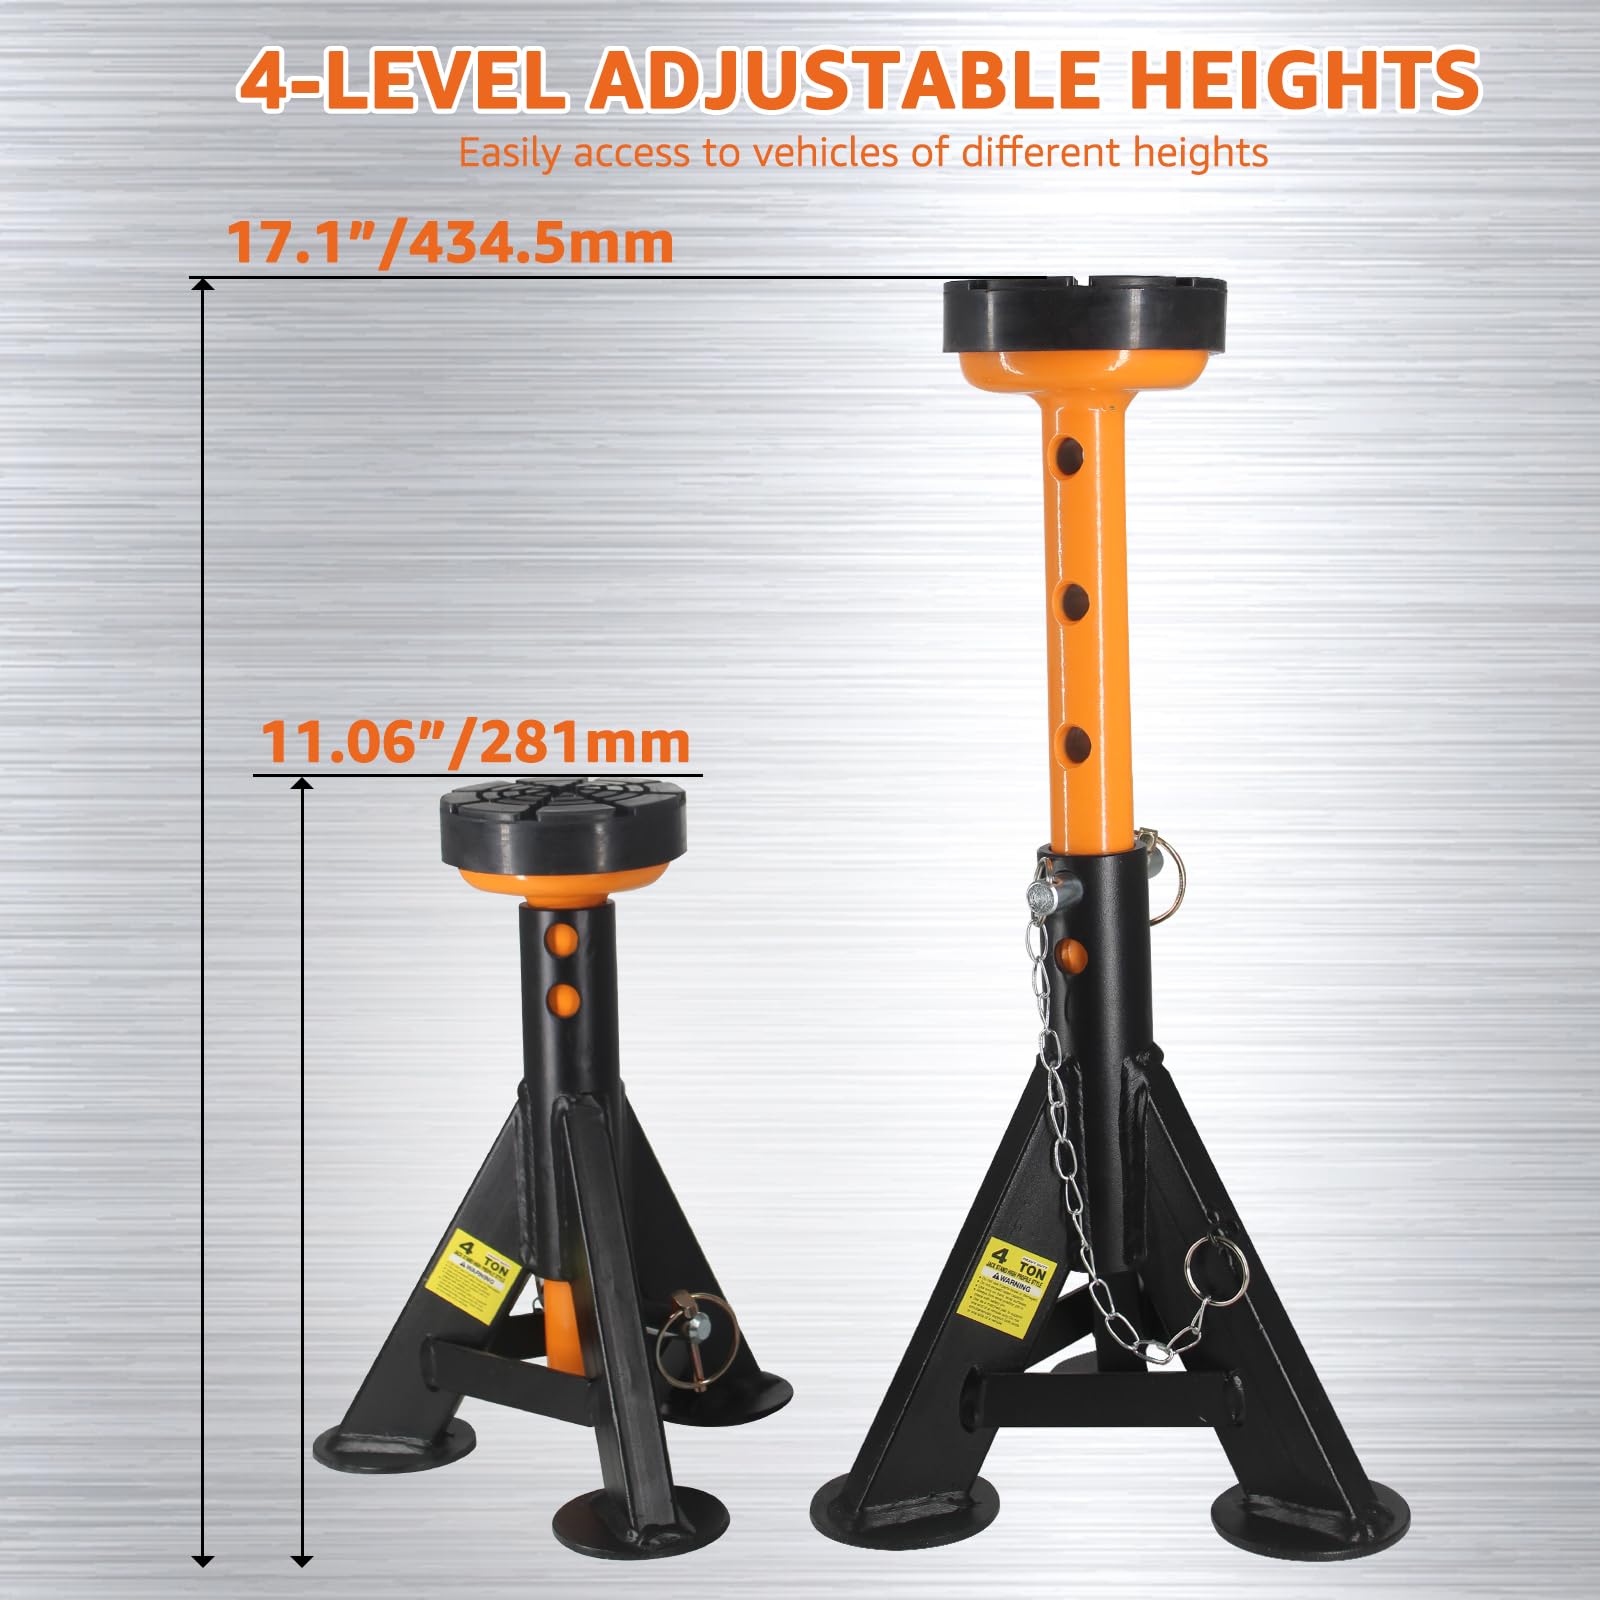 BESTOOL Low Profile Car Jack Stand | Mini Jack Stand with Security Locking Pins-4ton(8000Ibs) Capacity, 2 Pack